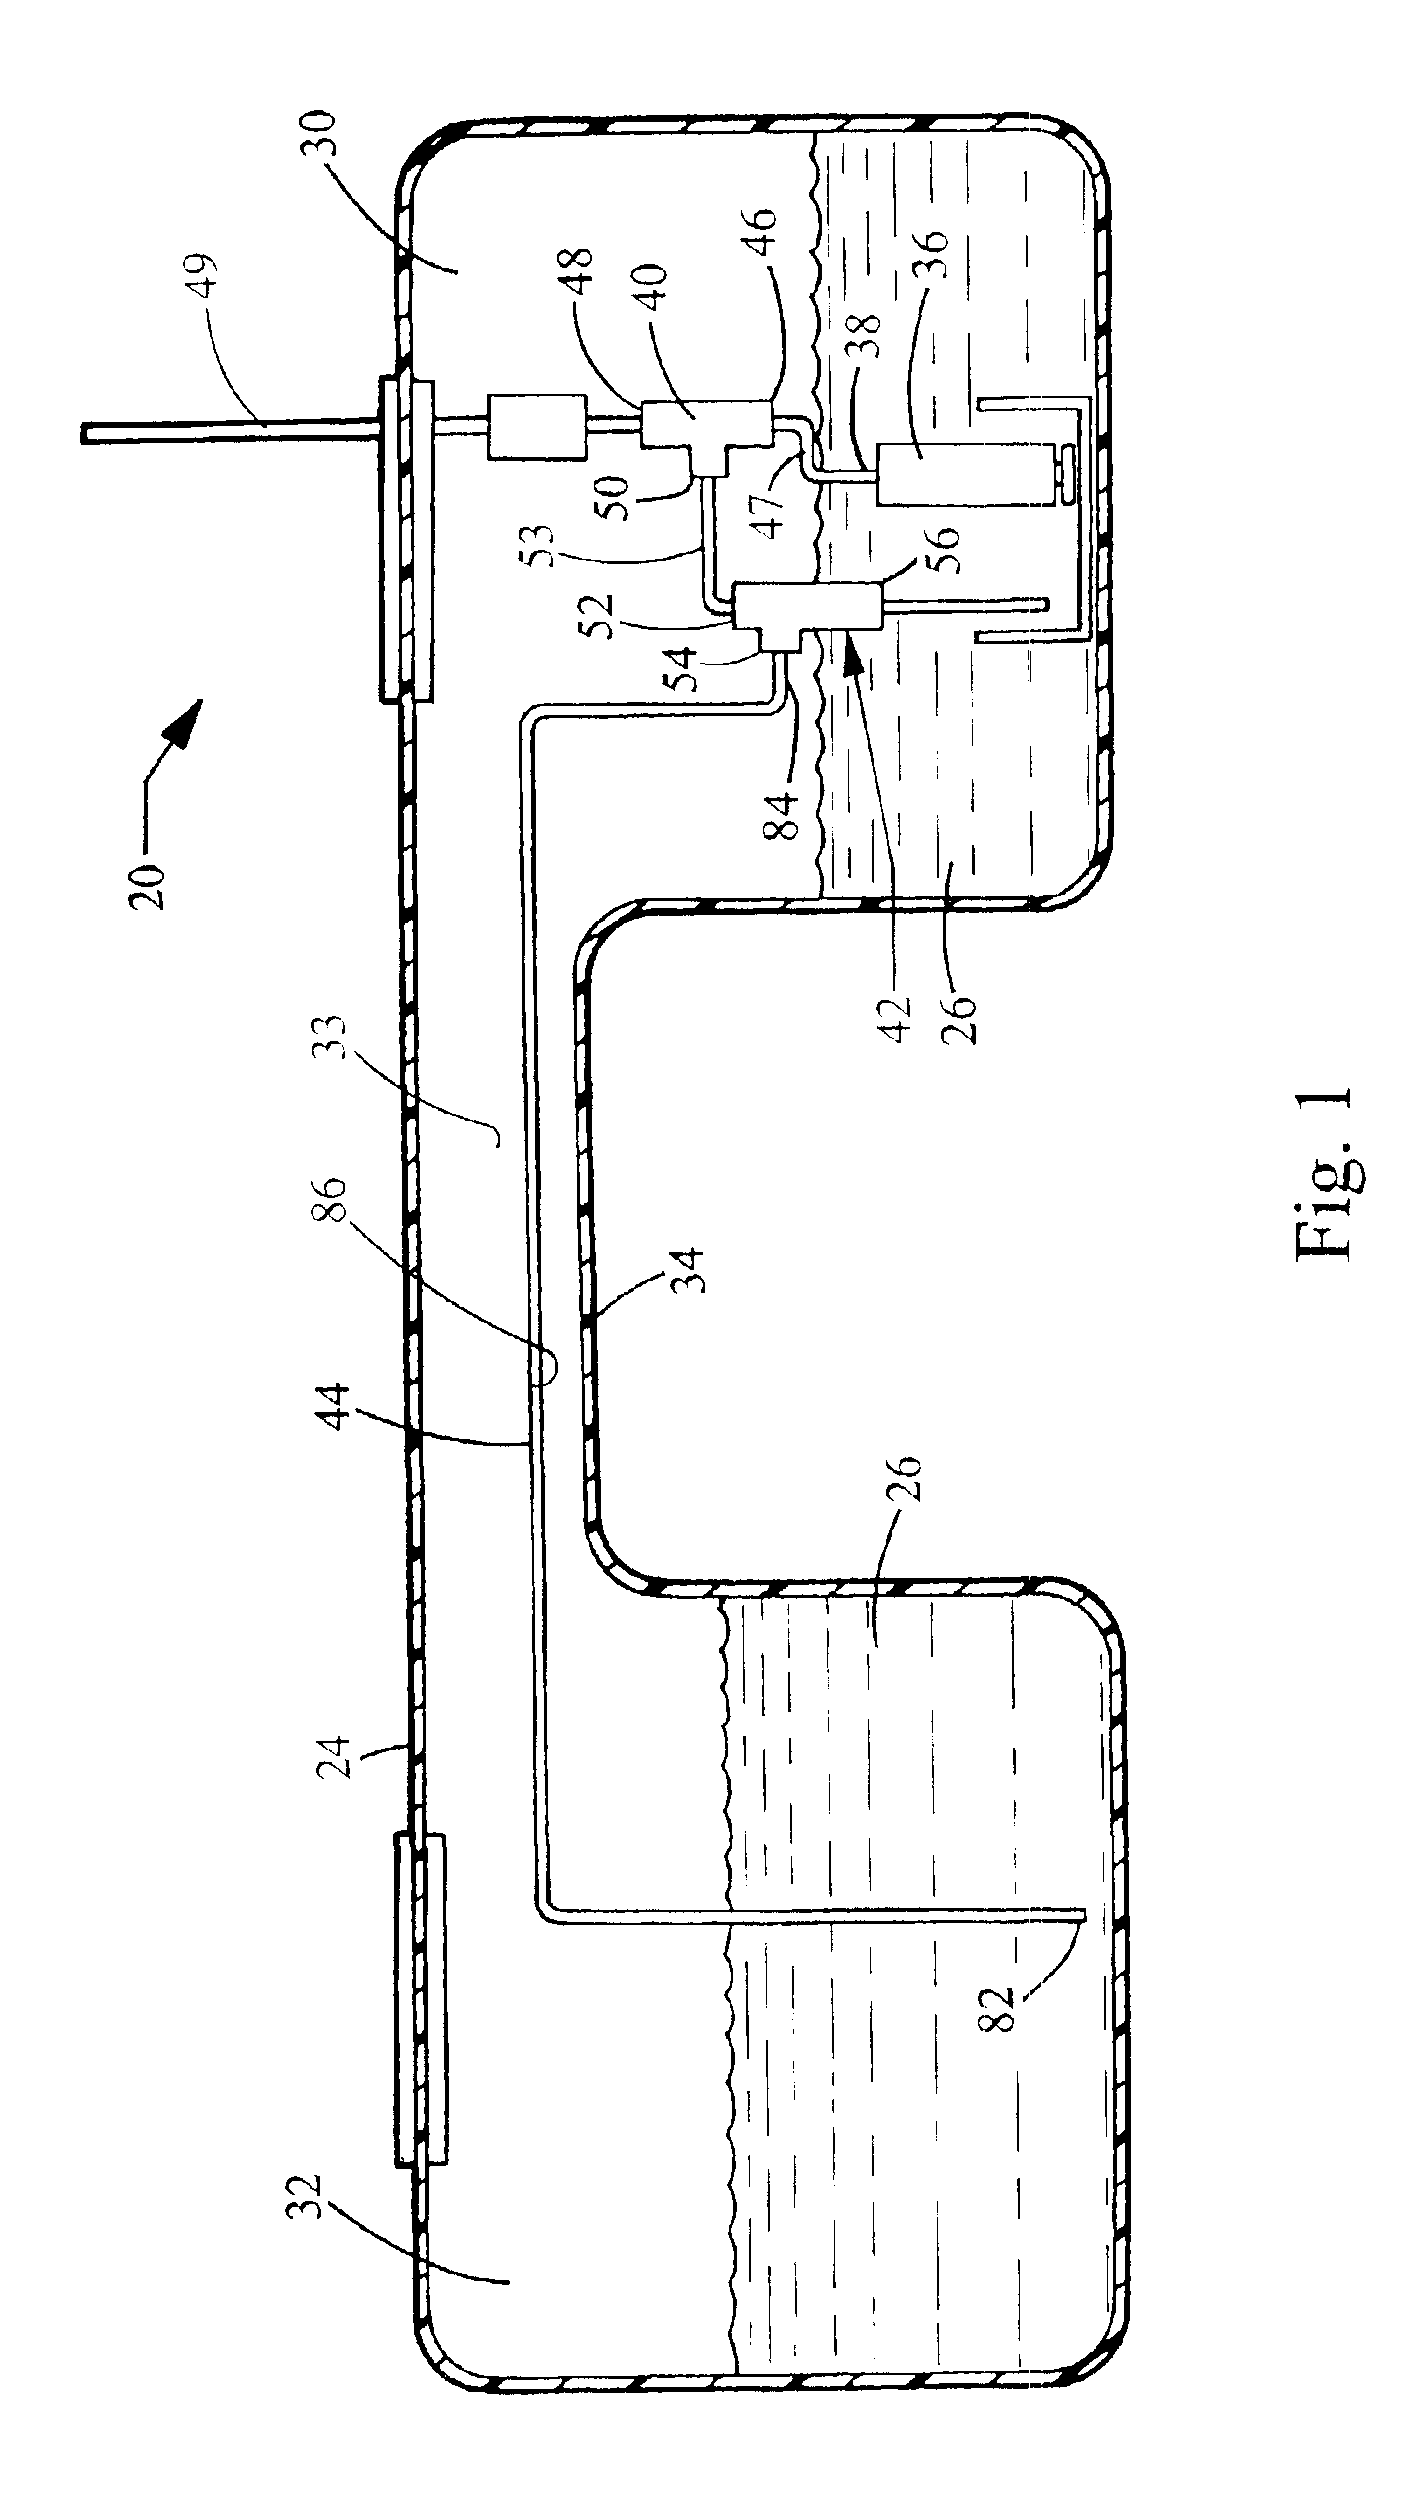 Saddle tank fuel delivery system